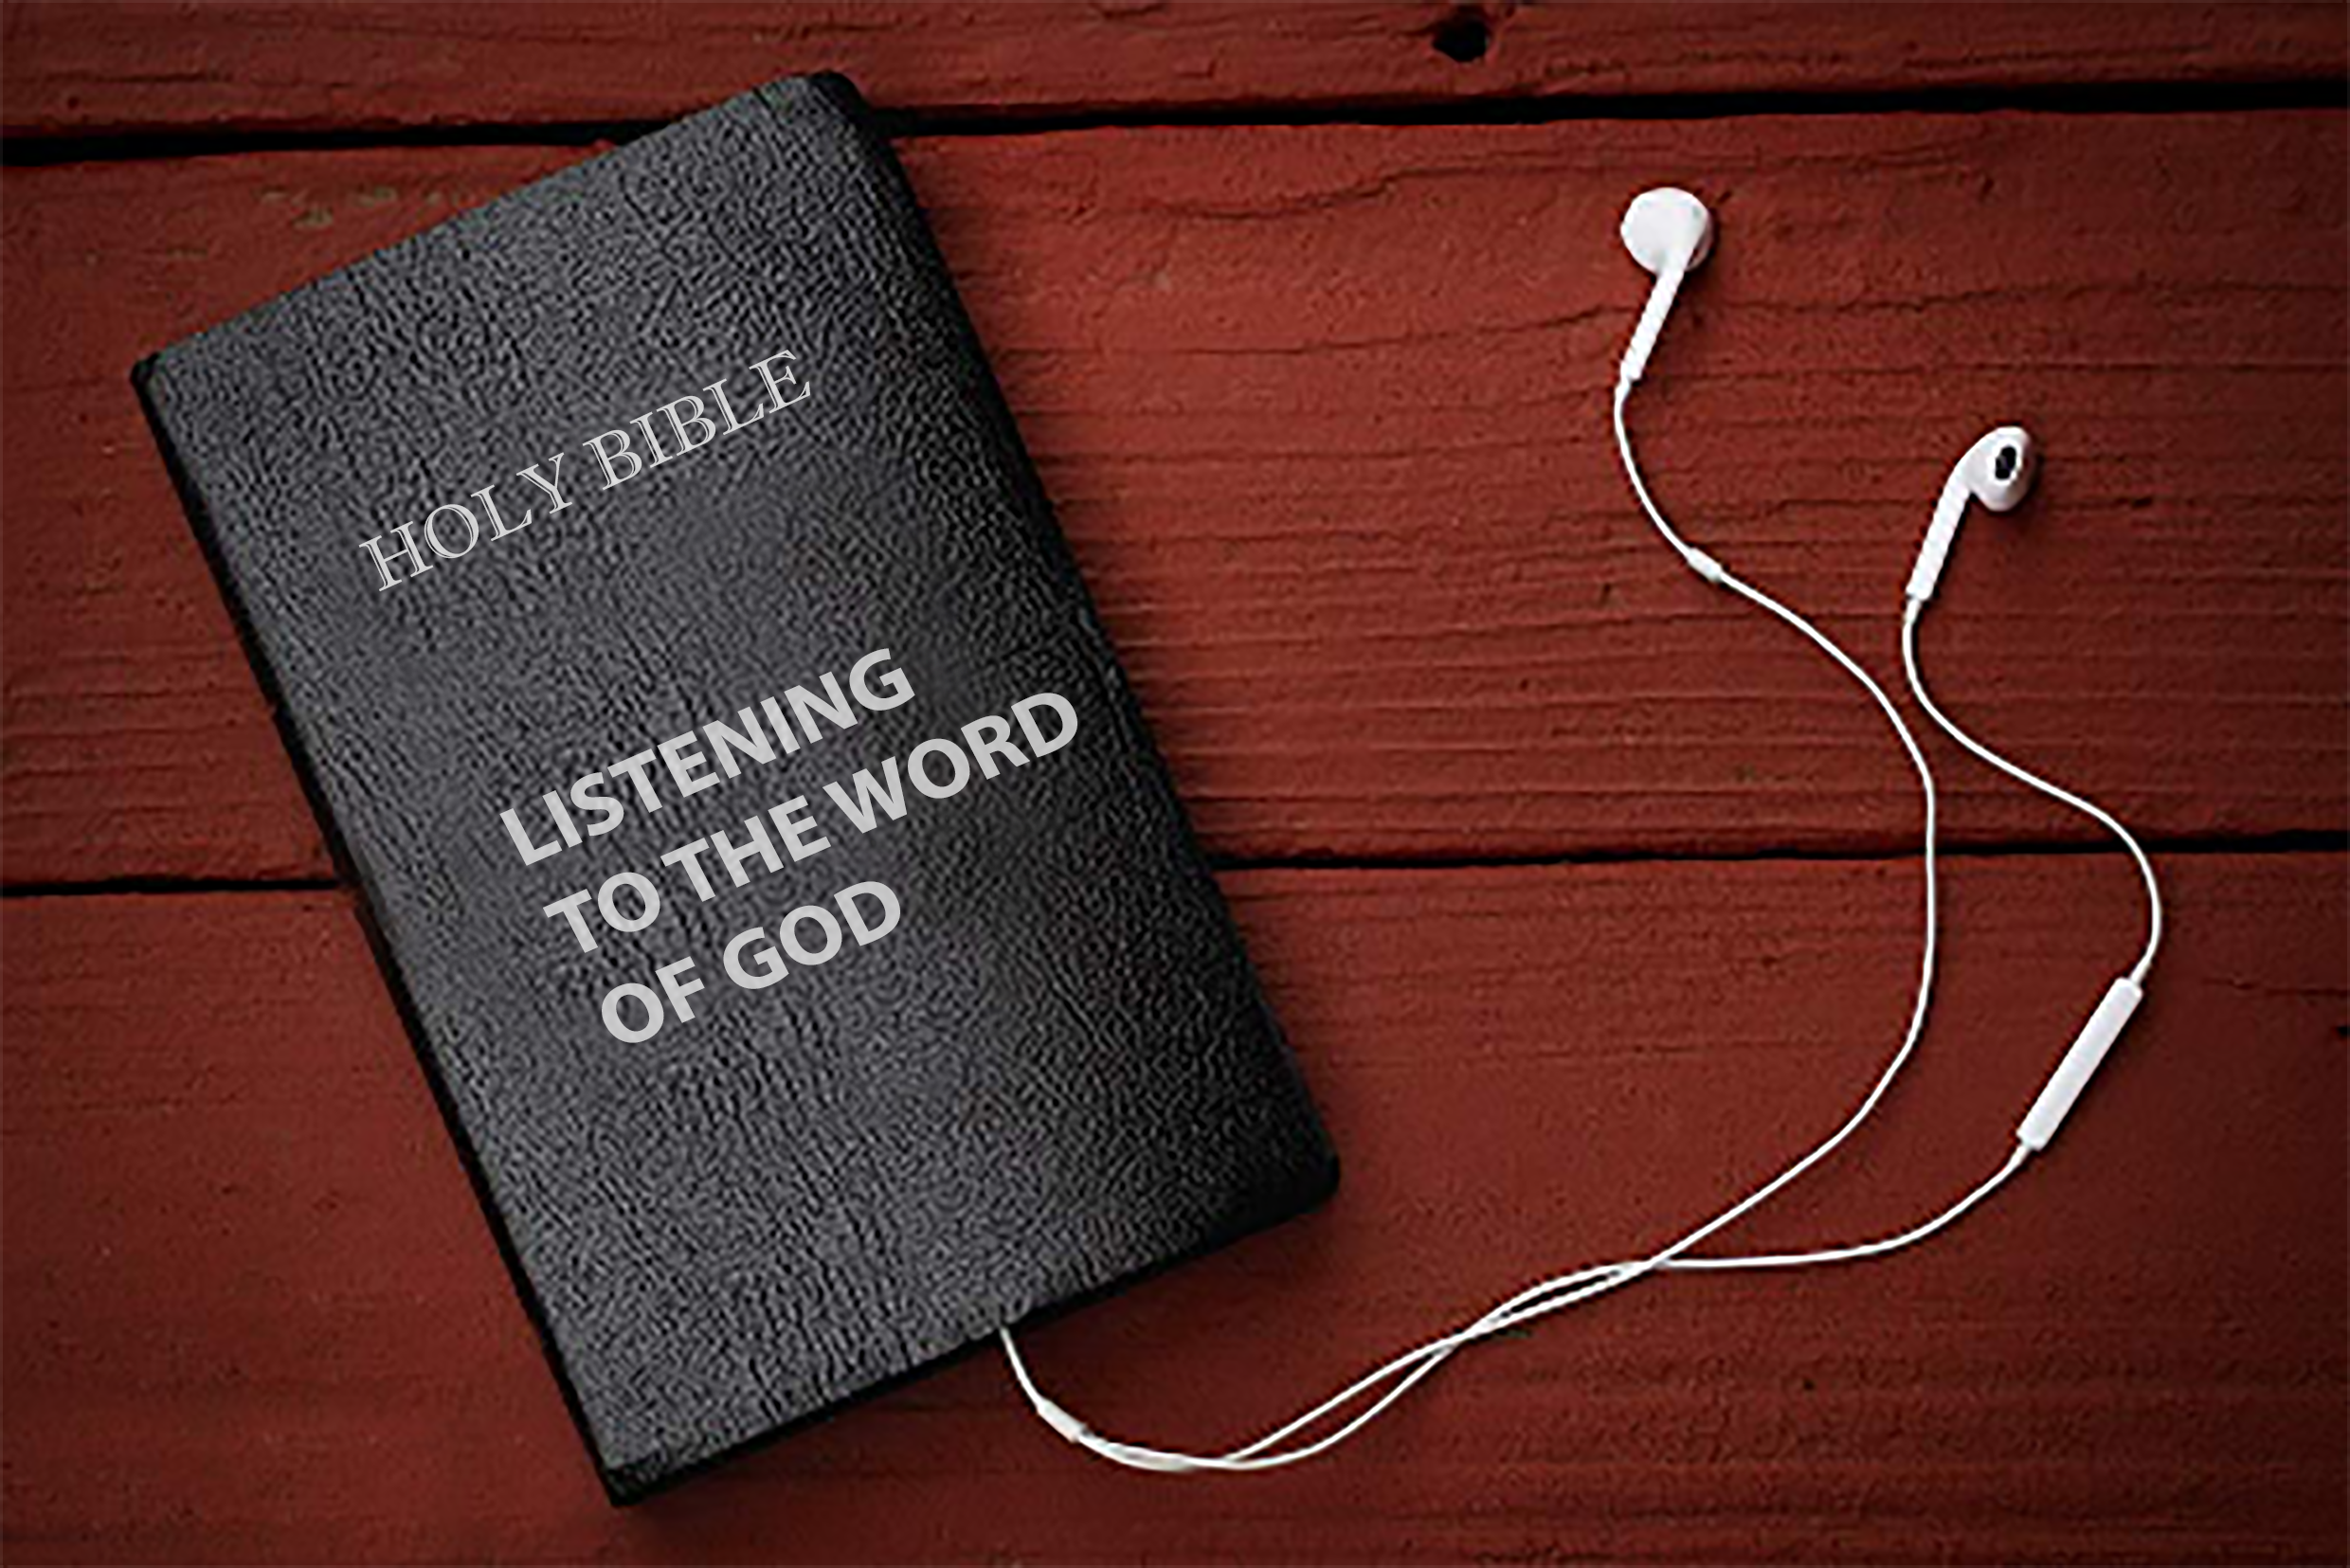 Listening to the Word of God